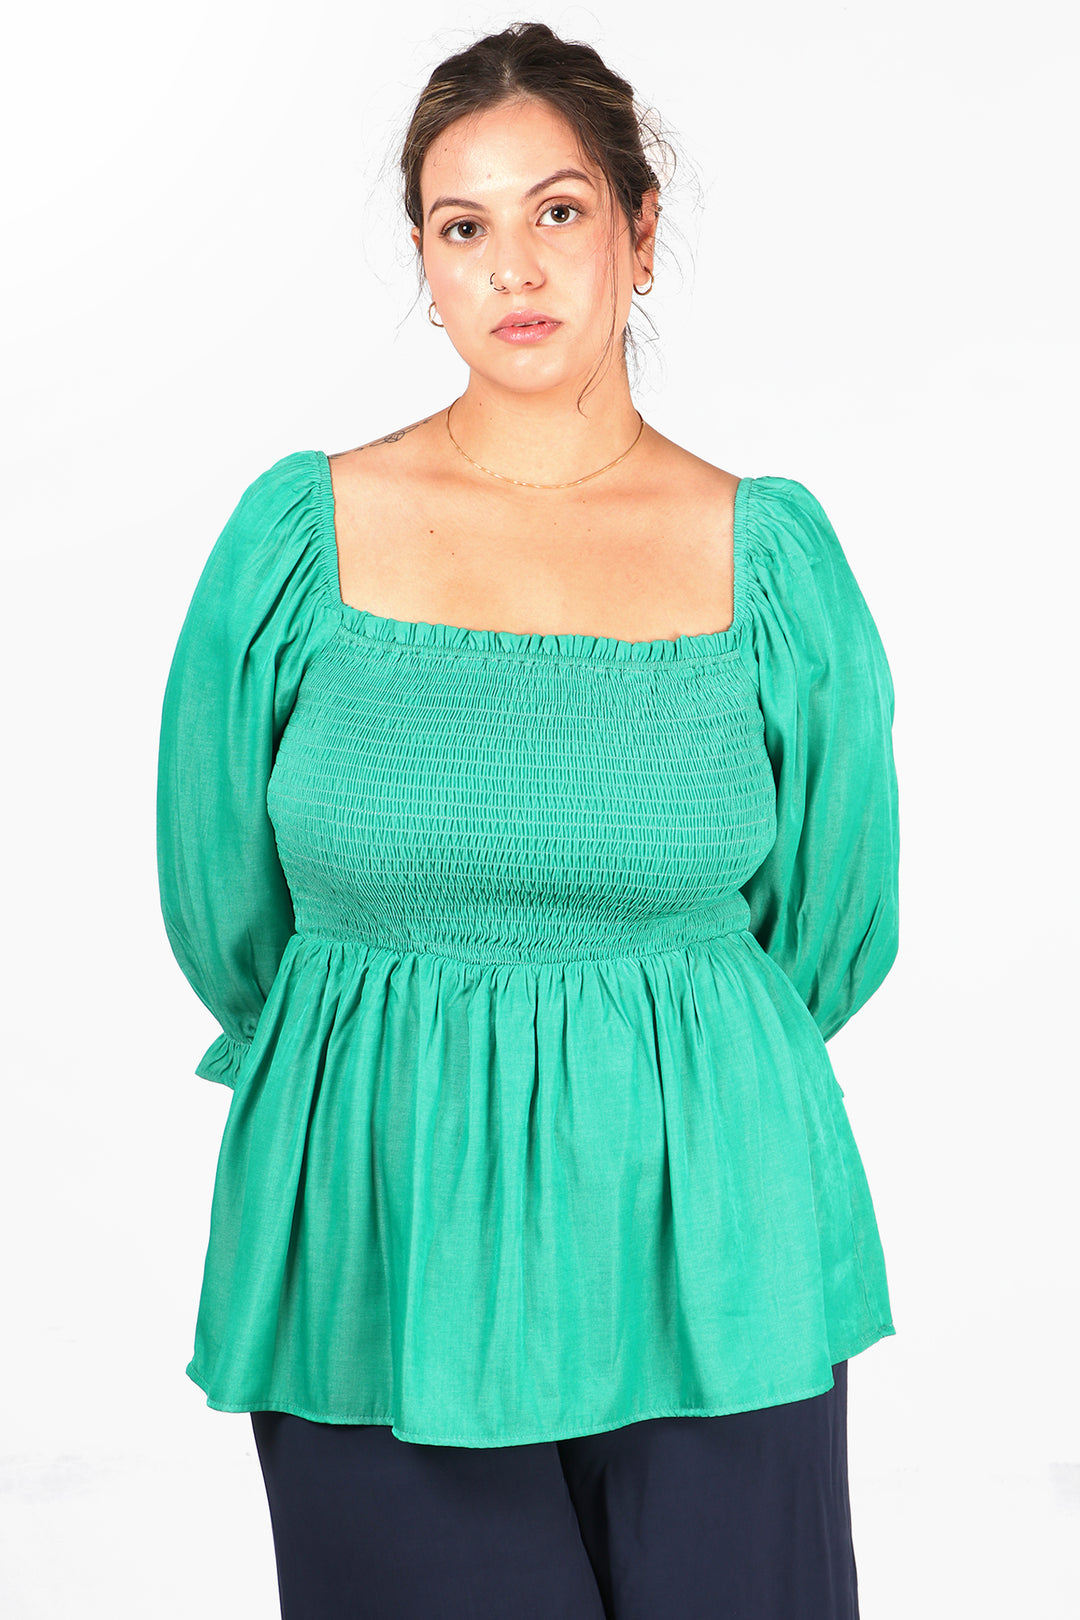 model wearing a green milkmaid top with shirred bodice